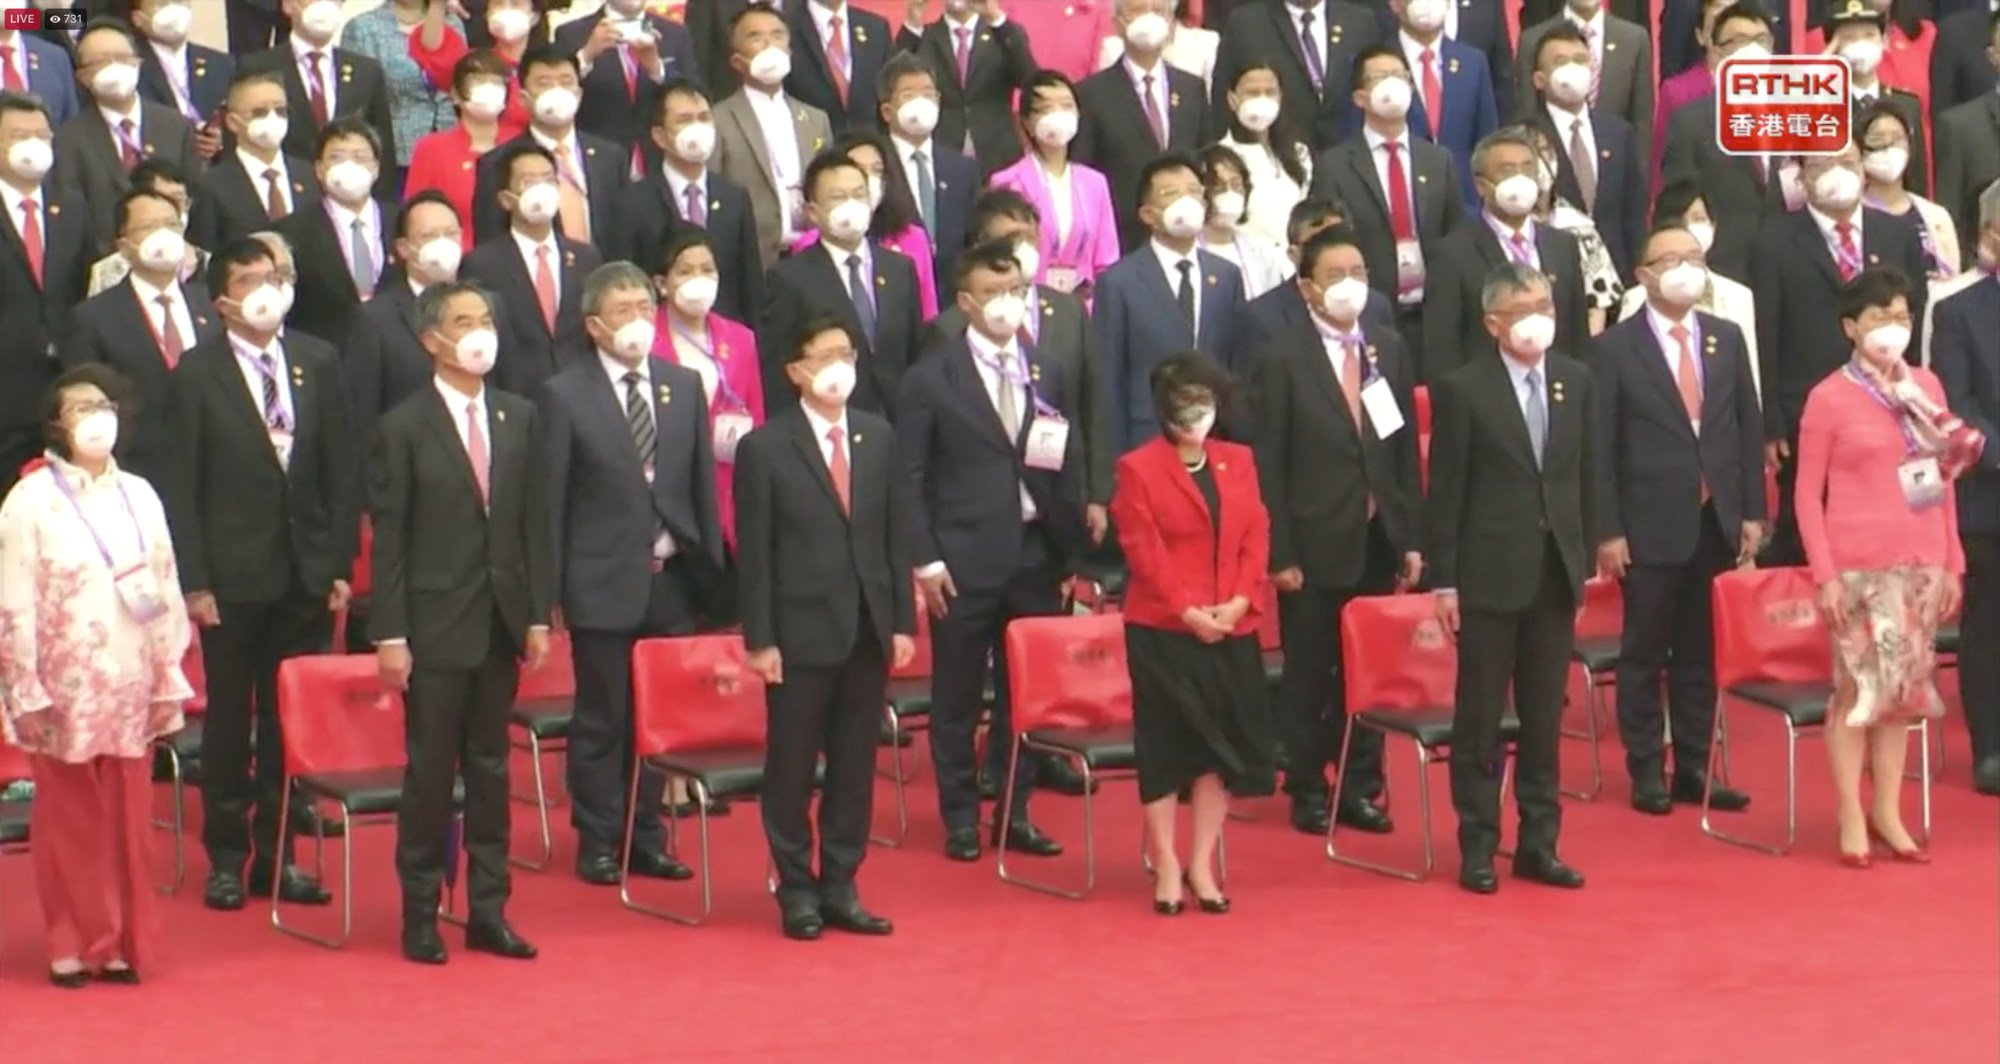 Guests at the flag ceremony included the city’s former leaders. Photo: RTHK